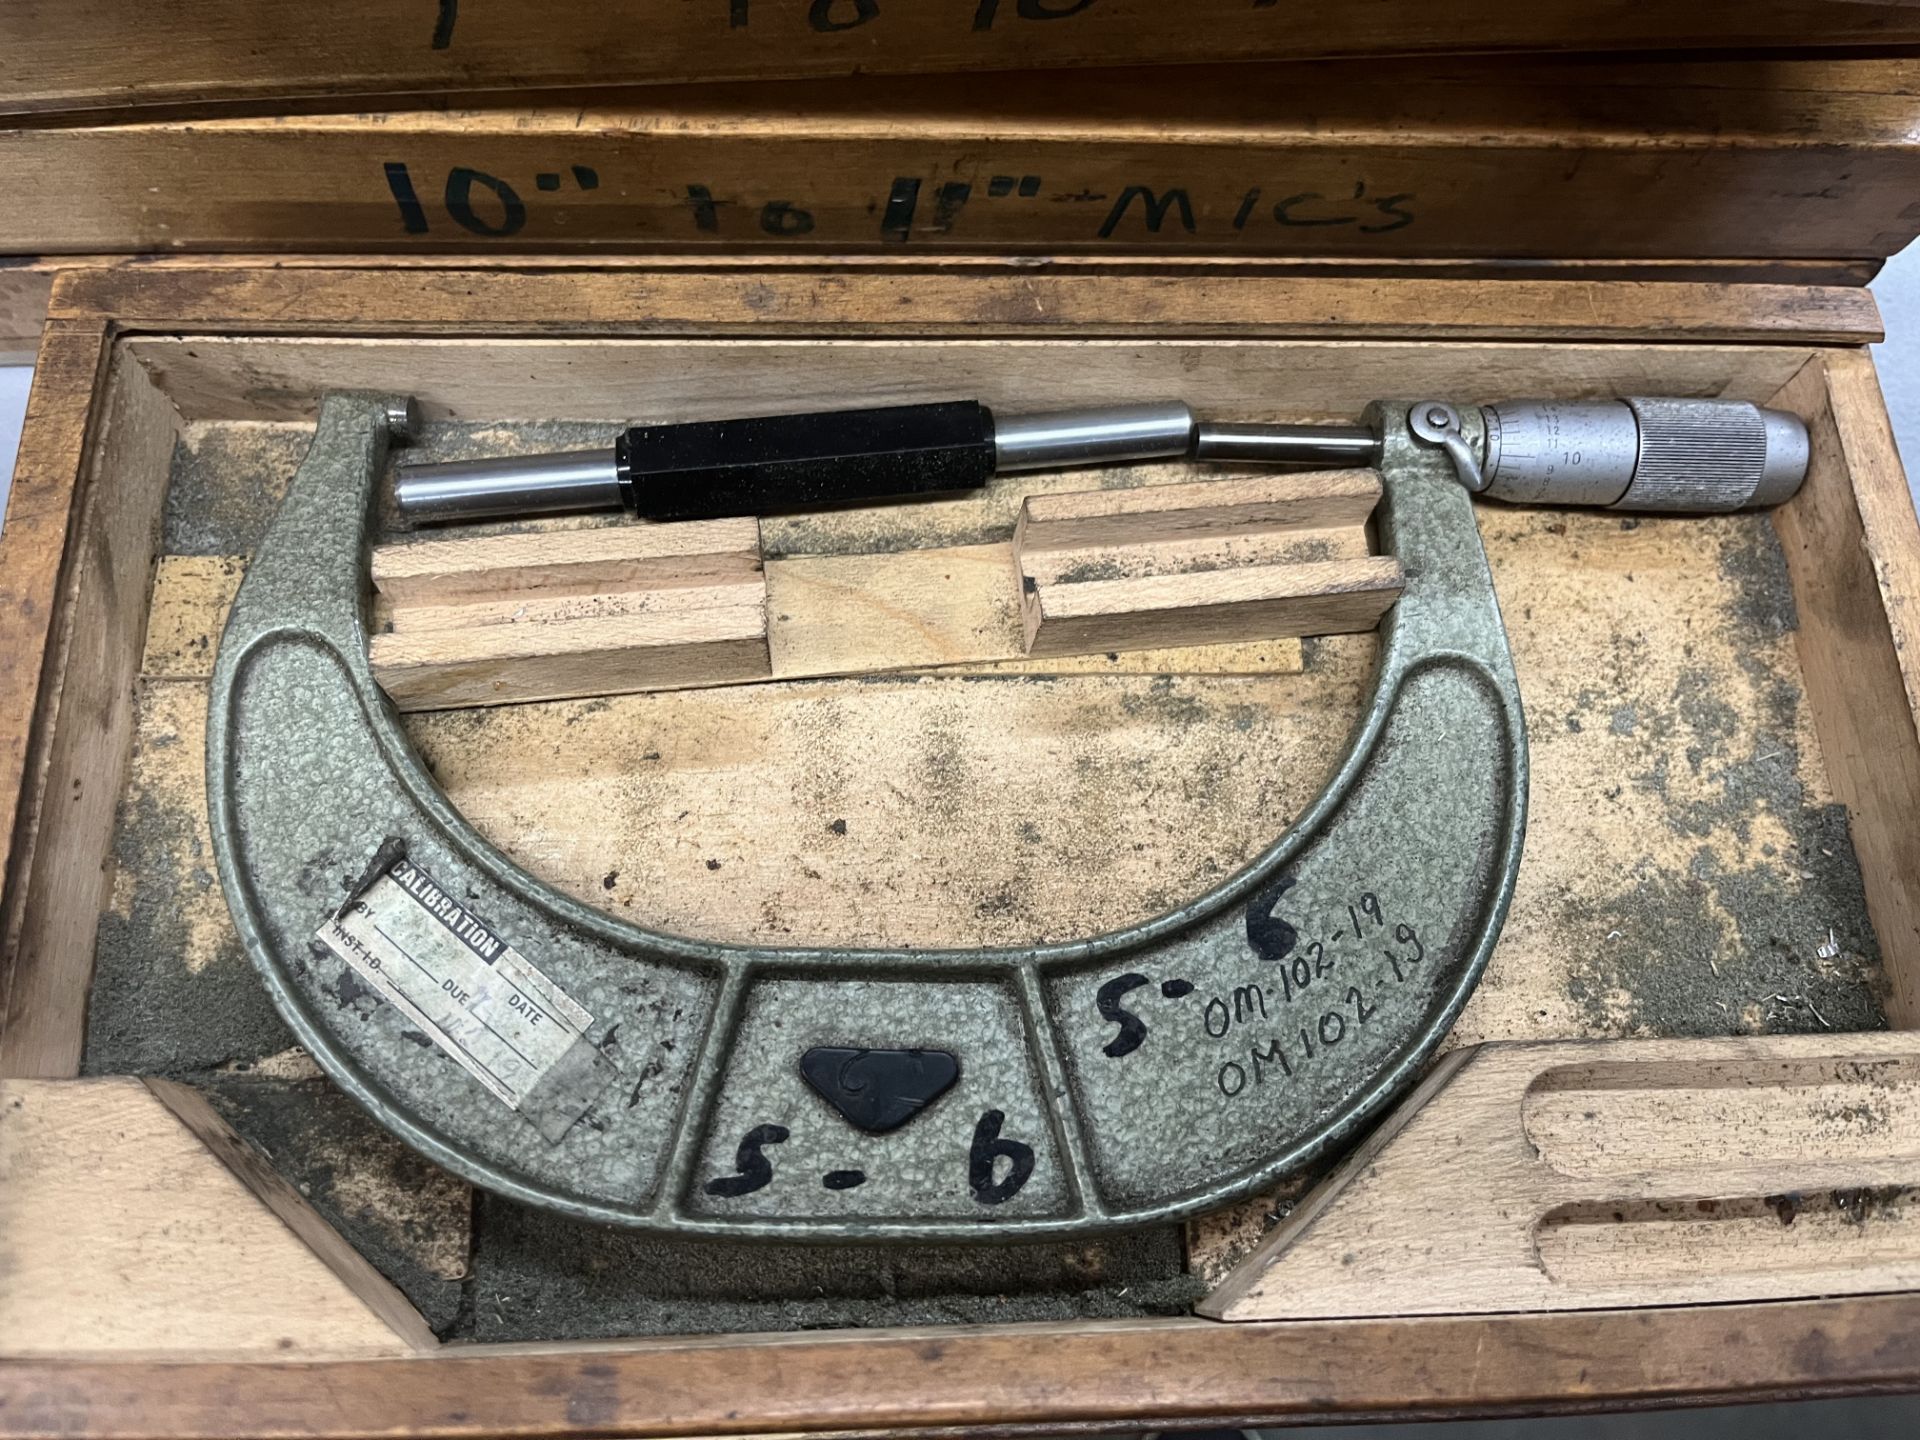 (9) OD Micrometer - (2) 4" to 5", (1) 5" to 6", (1) 6" to 7", (1) 7" to 8", (1) 8" to 9, (1) 9" t - Image 3 of 9